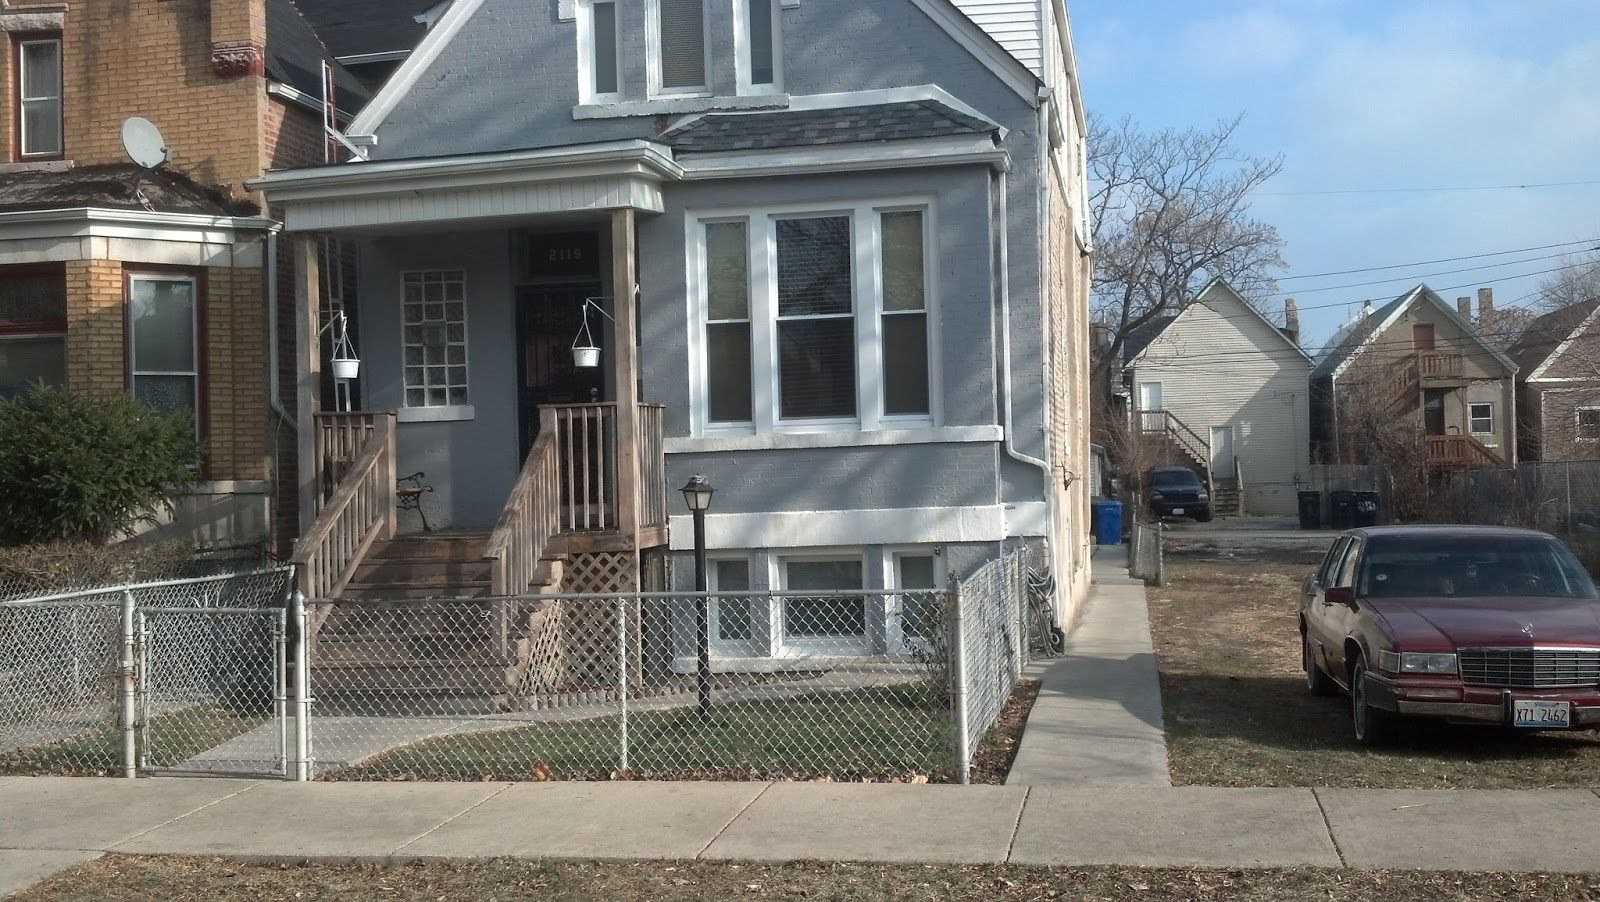 The picture of house where shameless was filmed